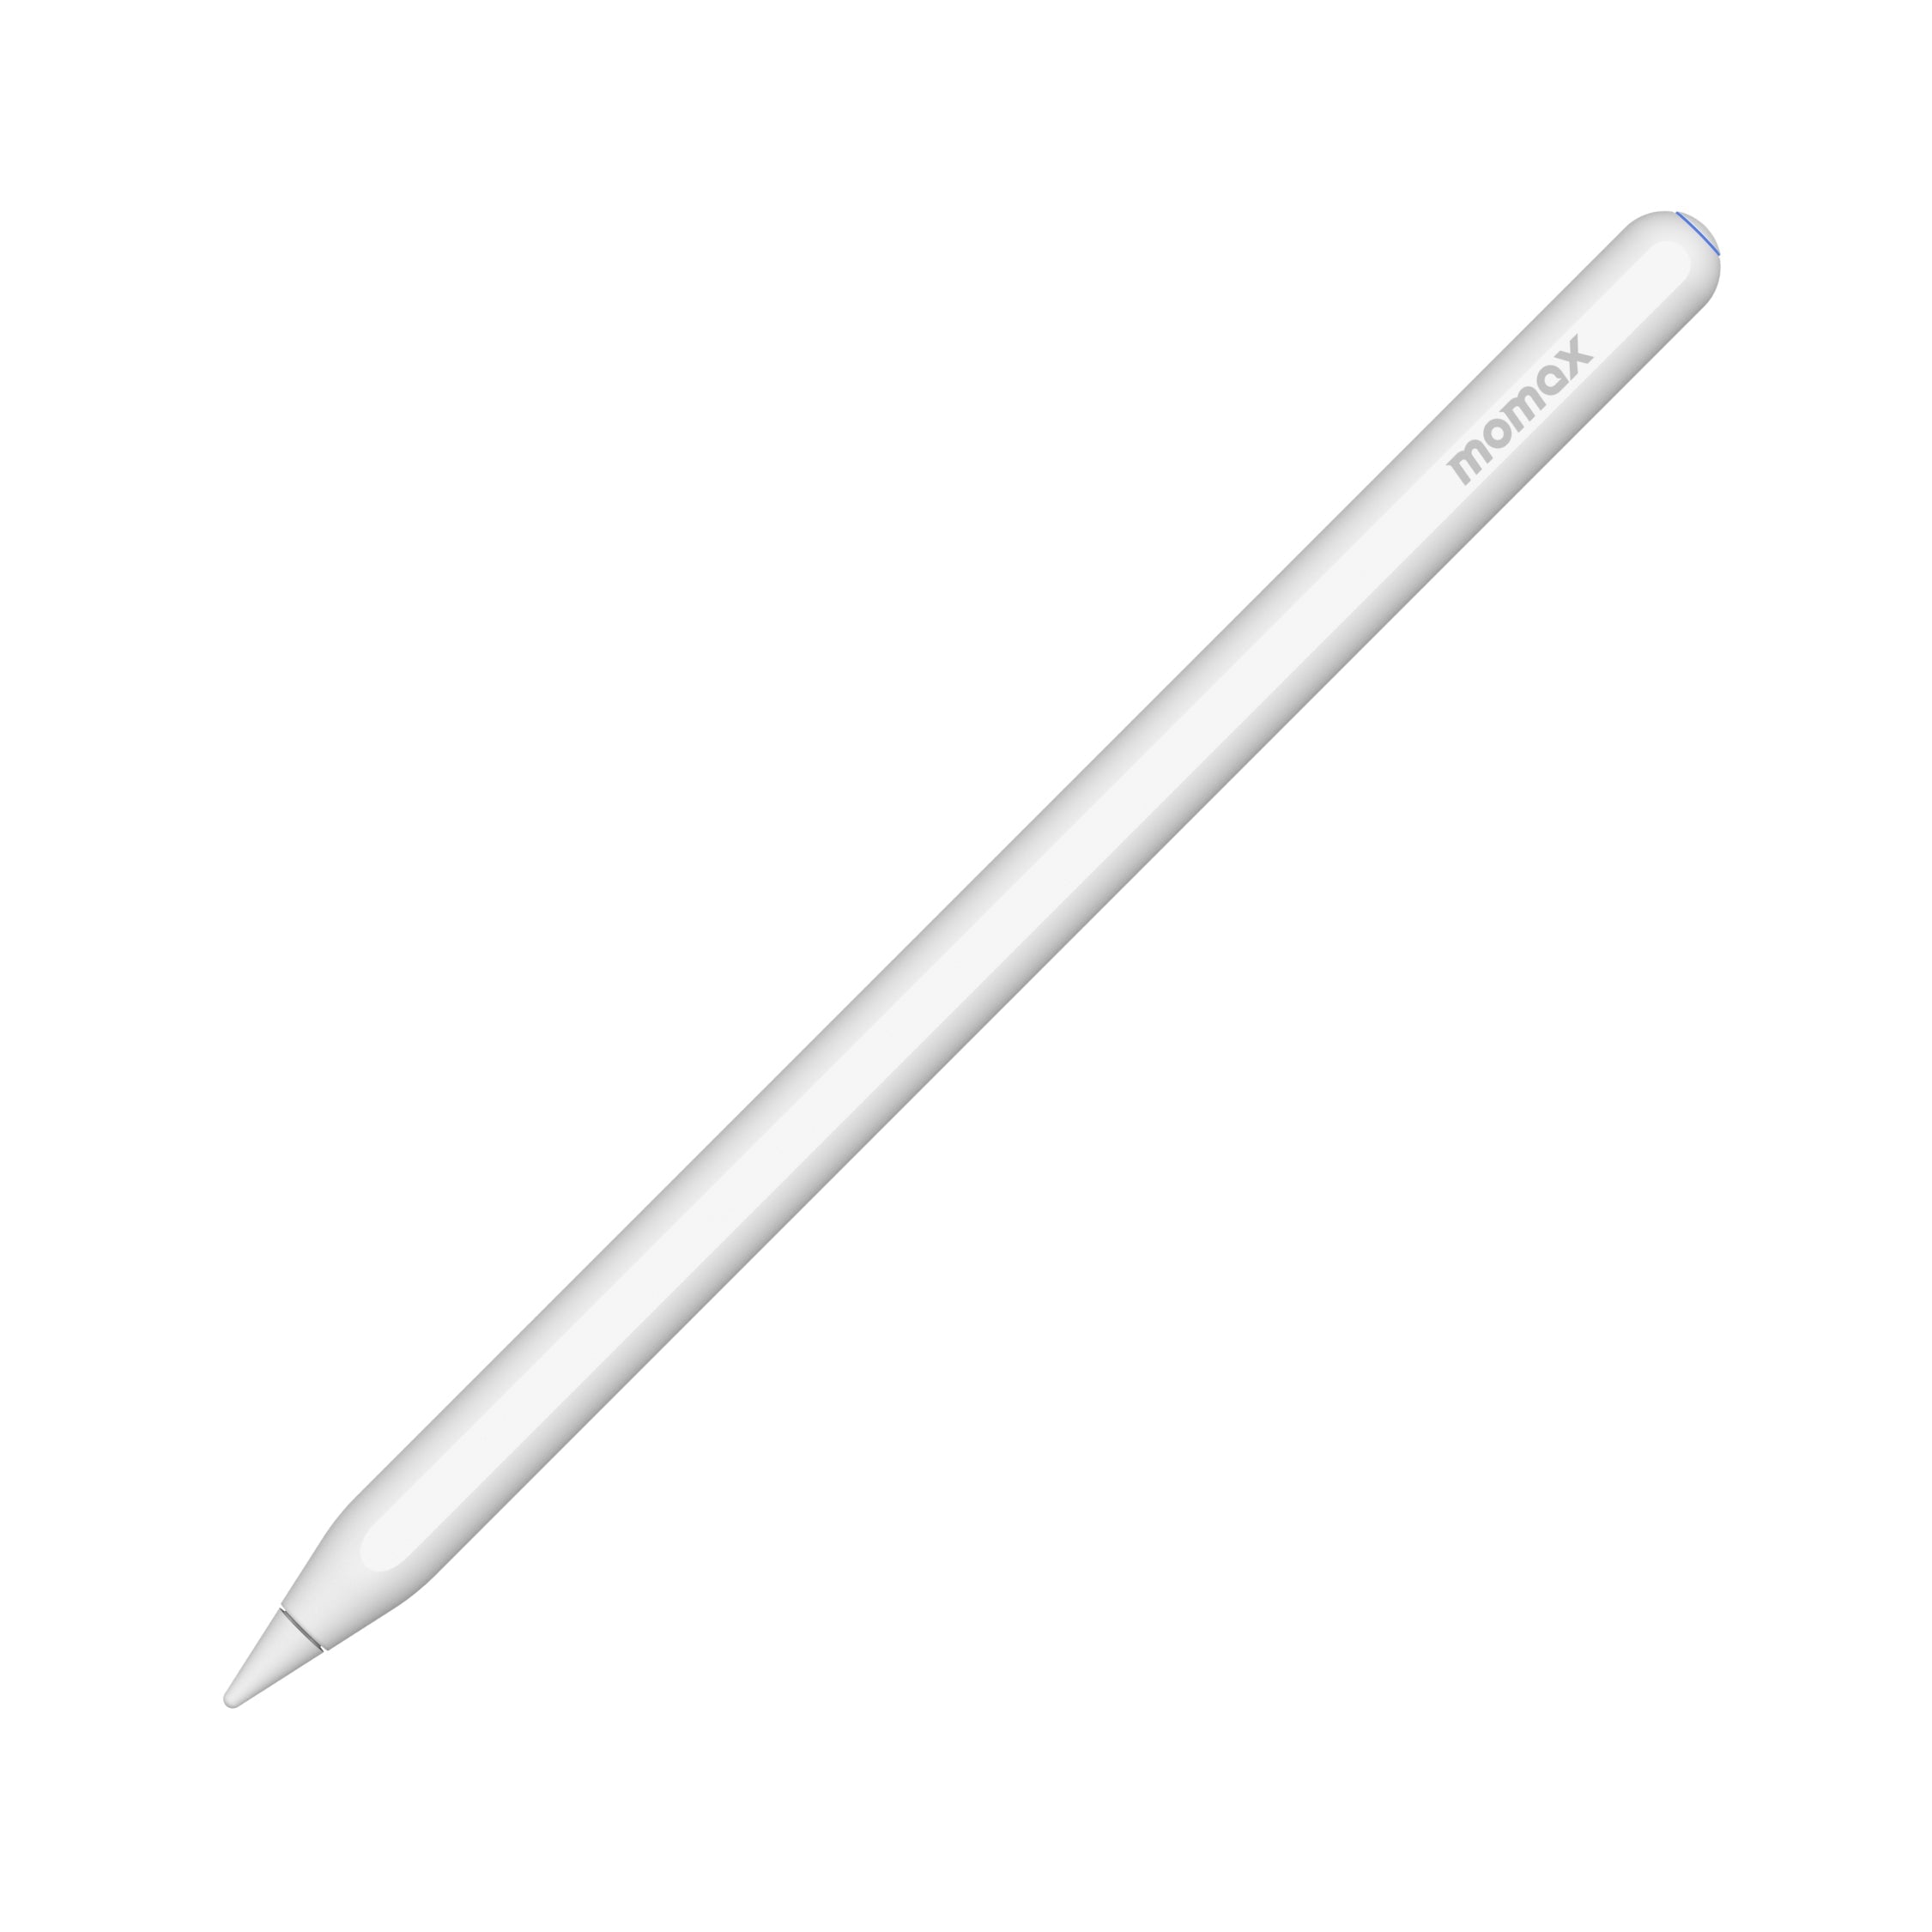 Onelink -Active Capacitive Stylus 3.0